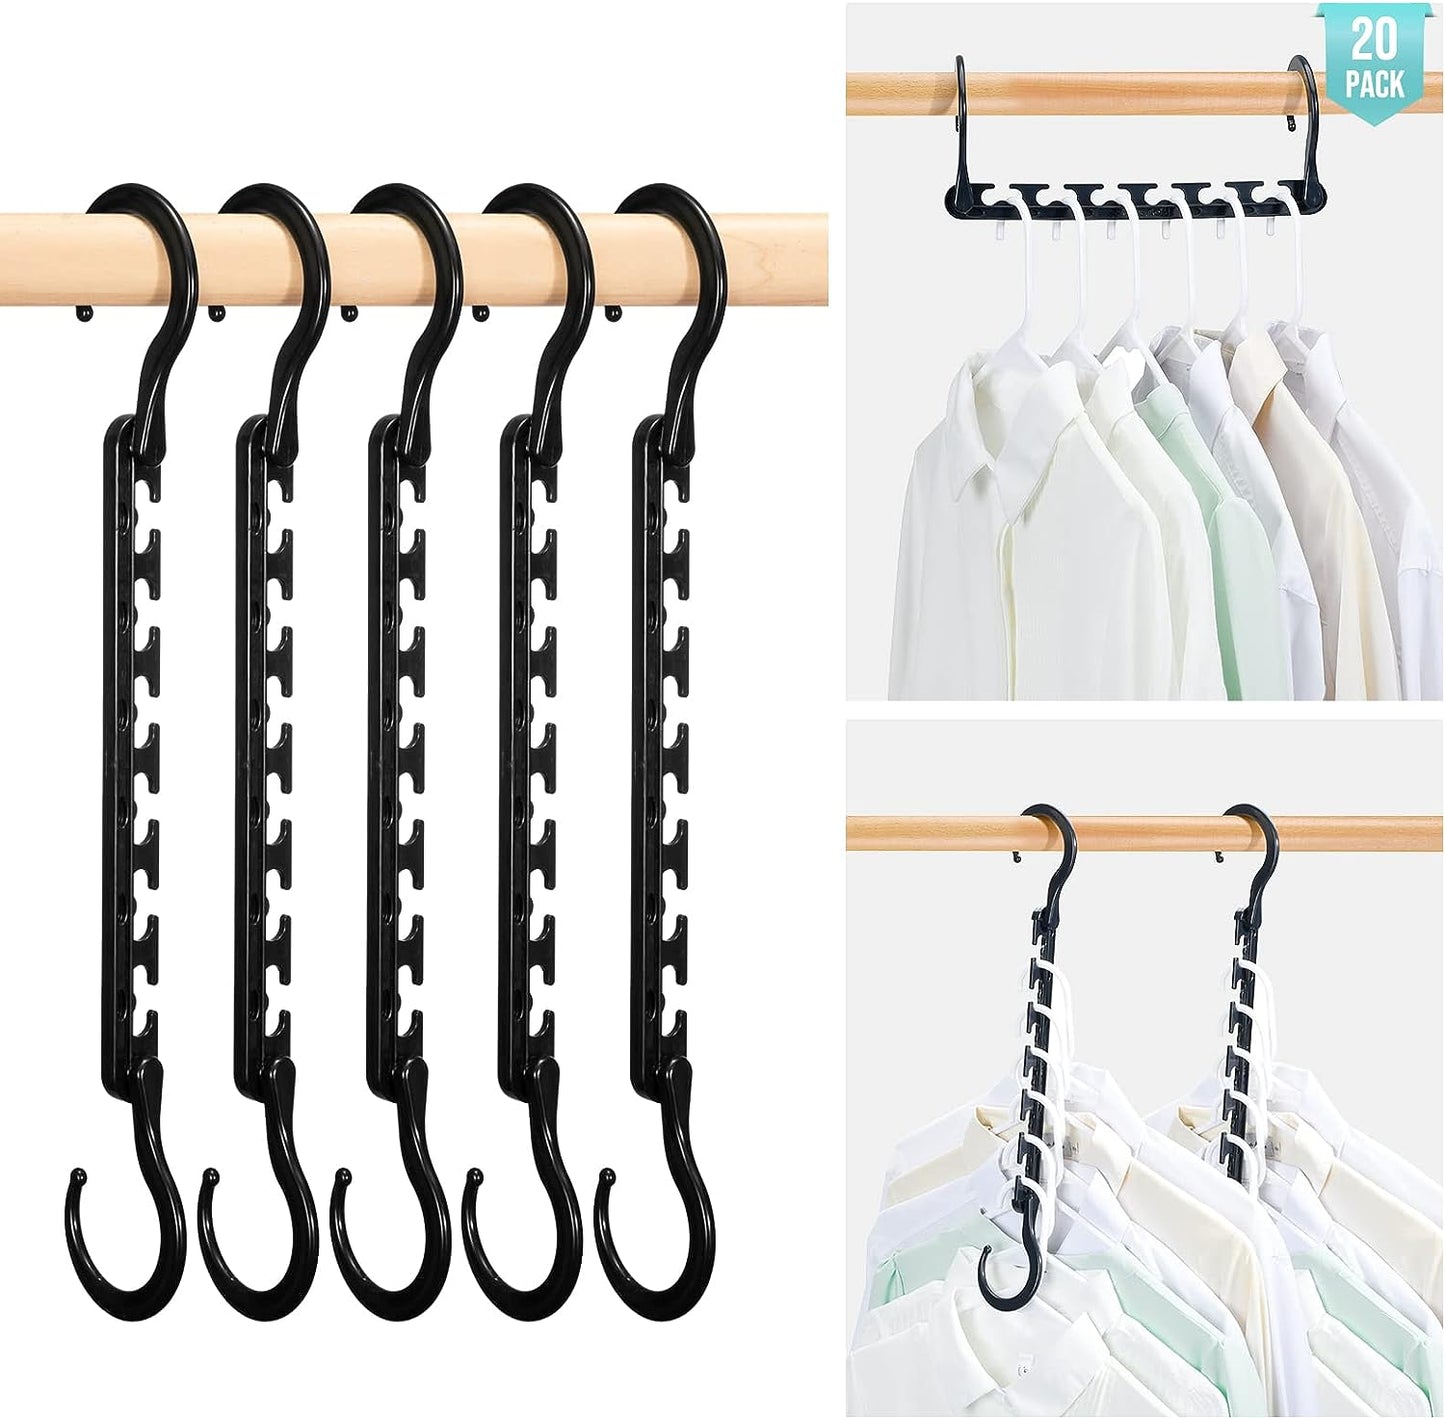 HOUSE DAY 10.6 Inch Sturdy Plastic Space Saving Hangers Black 20 Pack